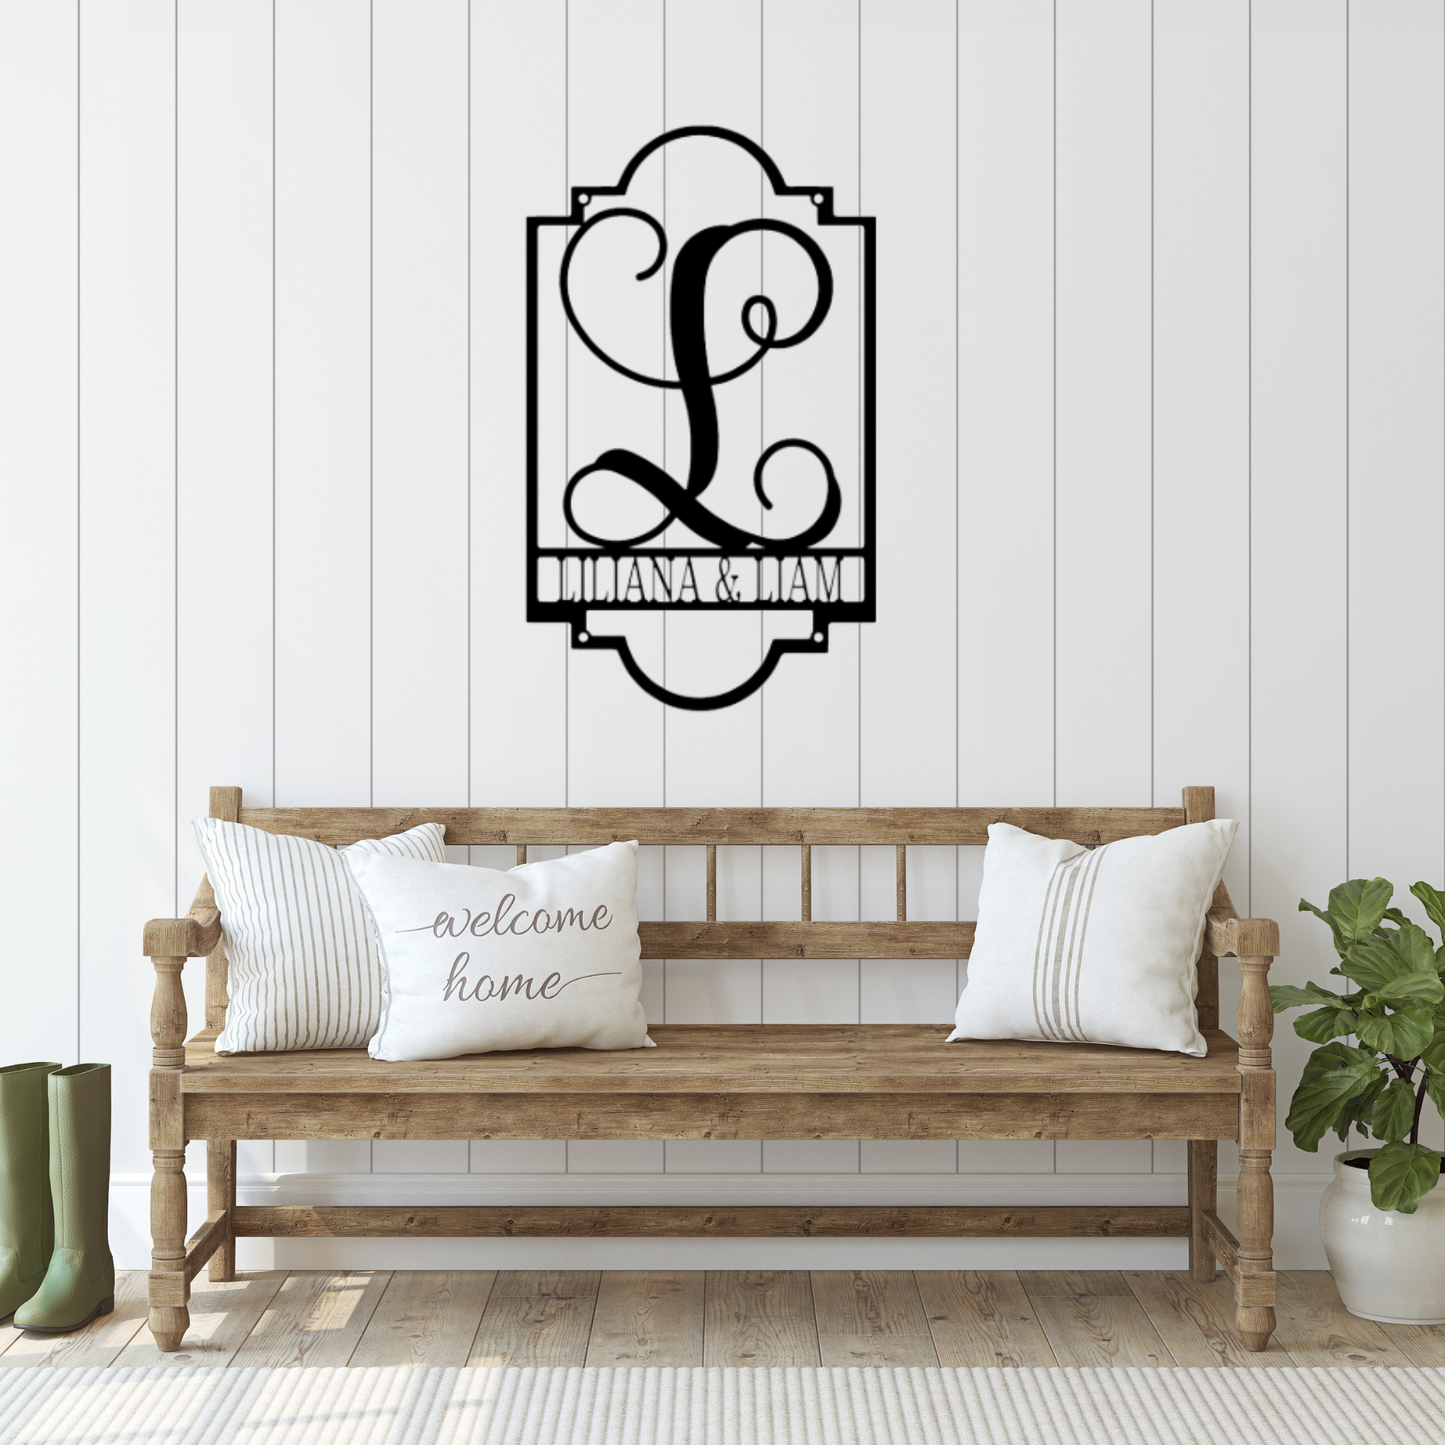 Fancy Initial Letter with Fancy Rectangle  -  Metal Sign, Family Name Sign, Initial Wall Decor, Front Porch Name Sign